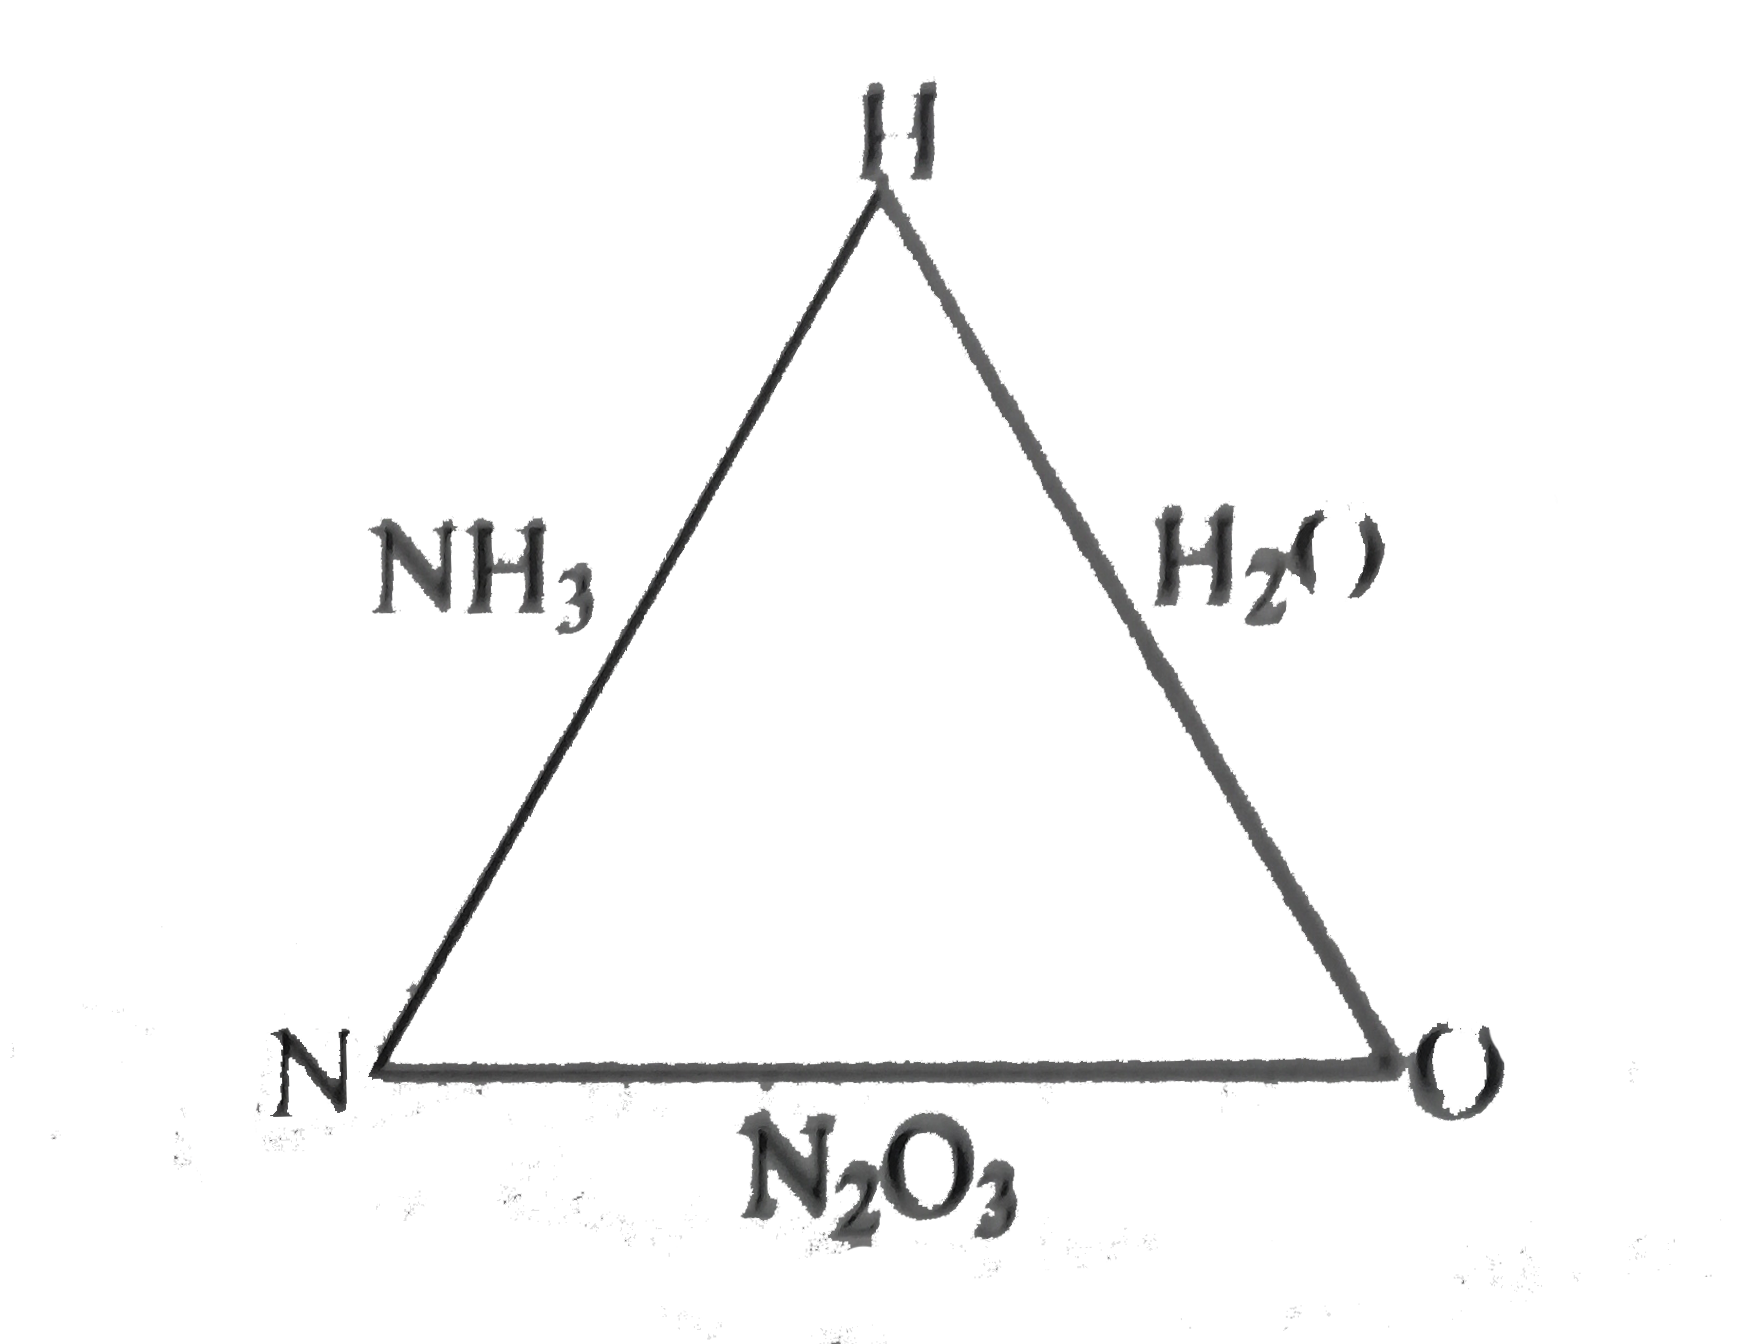 Ammonia contains 82.35% of nitrogen and 17.65% of hydrogen. Water contains 88.90% of oxygen . Nitrogen trioxide contains 63.15% of oxygen and 36.85% of nitrogen. Show by calculations from these data which law of chemicmal combination is verified.